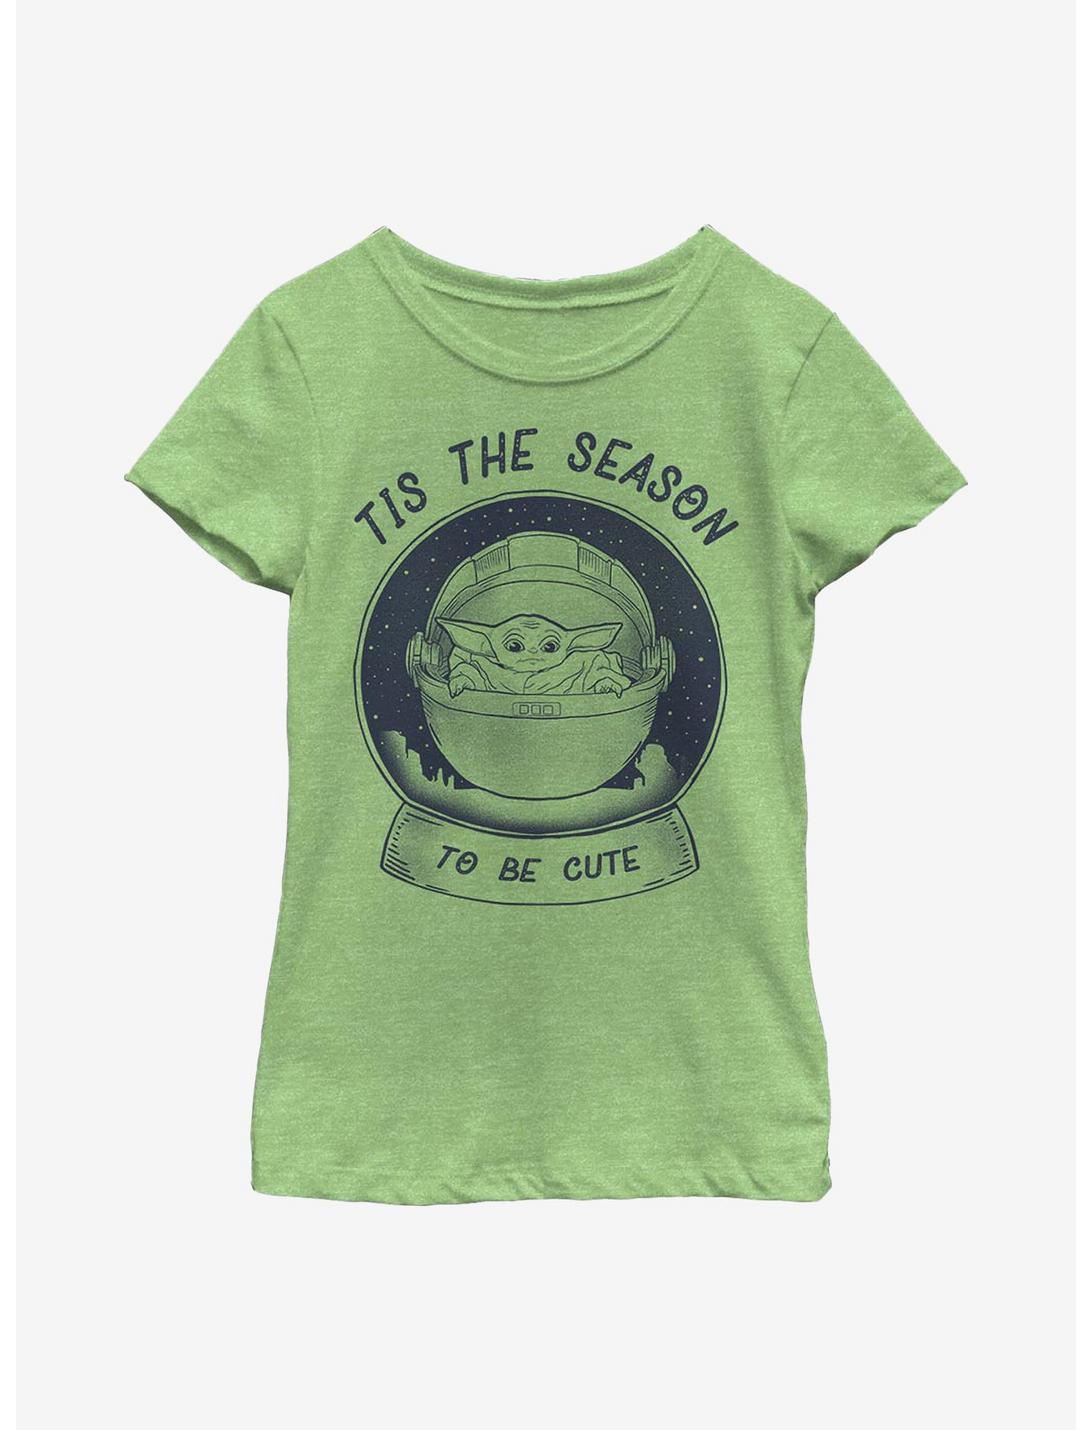 Star Wars The Mandalorian The Child Snow Baby Youth Girls T-Shirt, GRN APPLE, hi-res